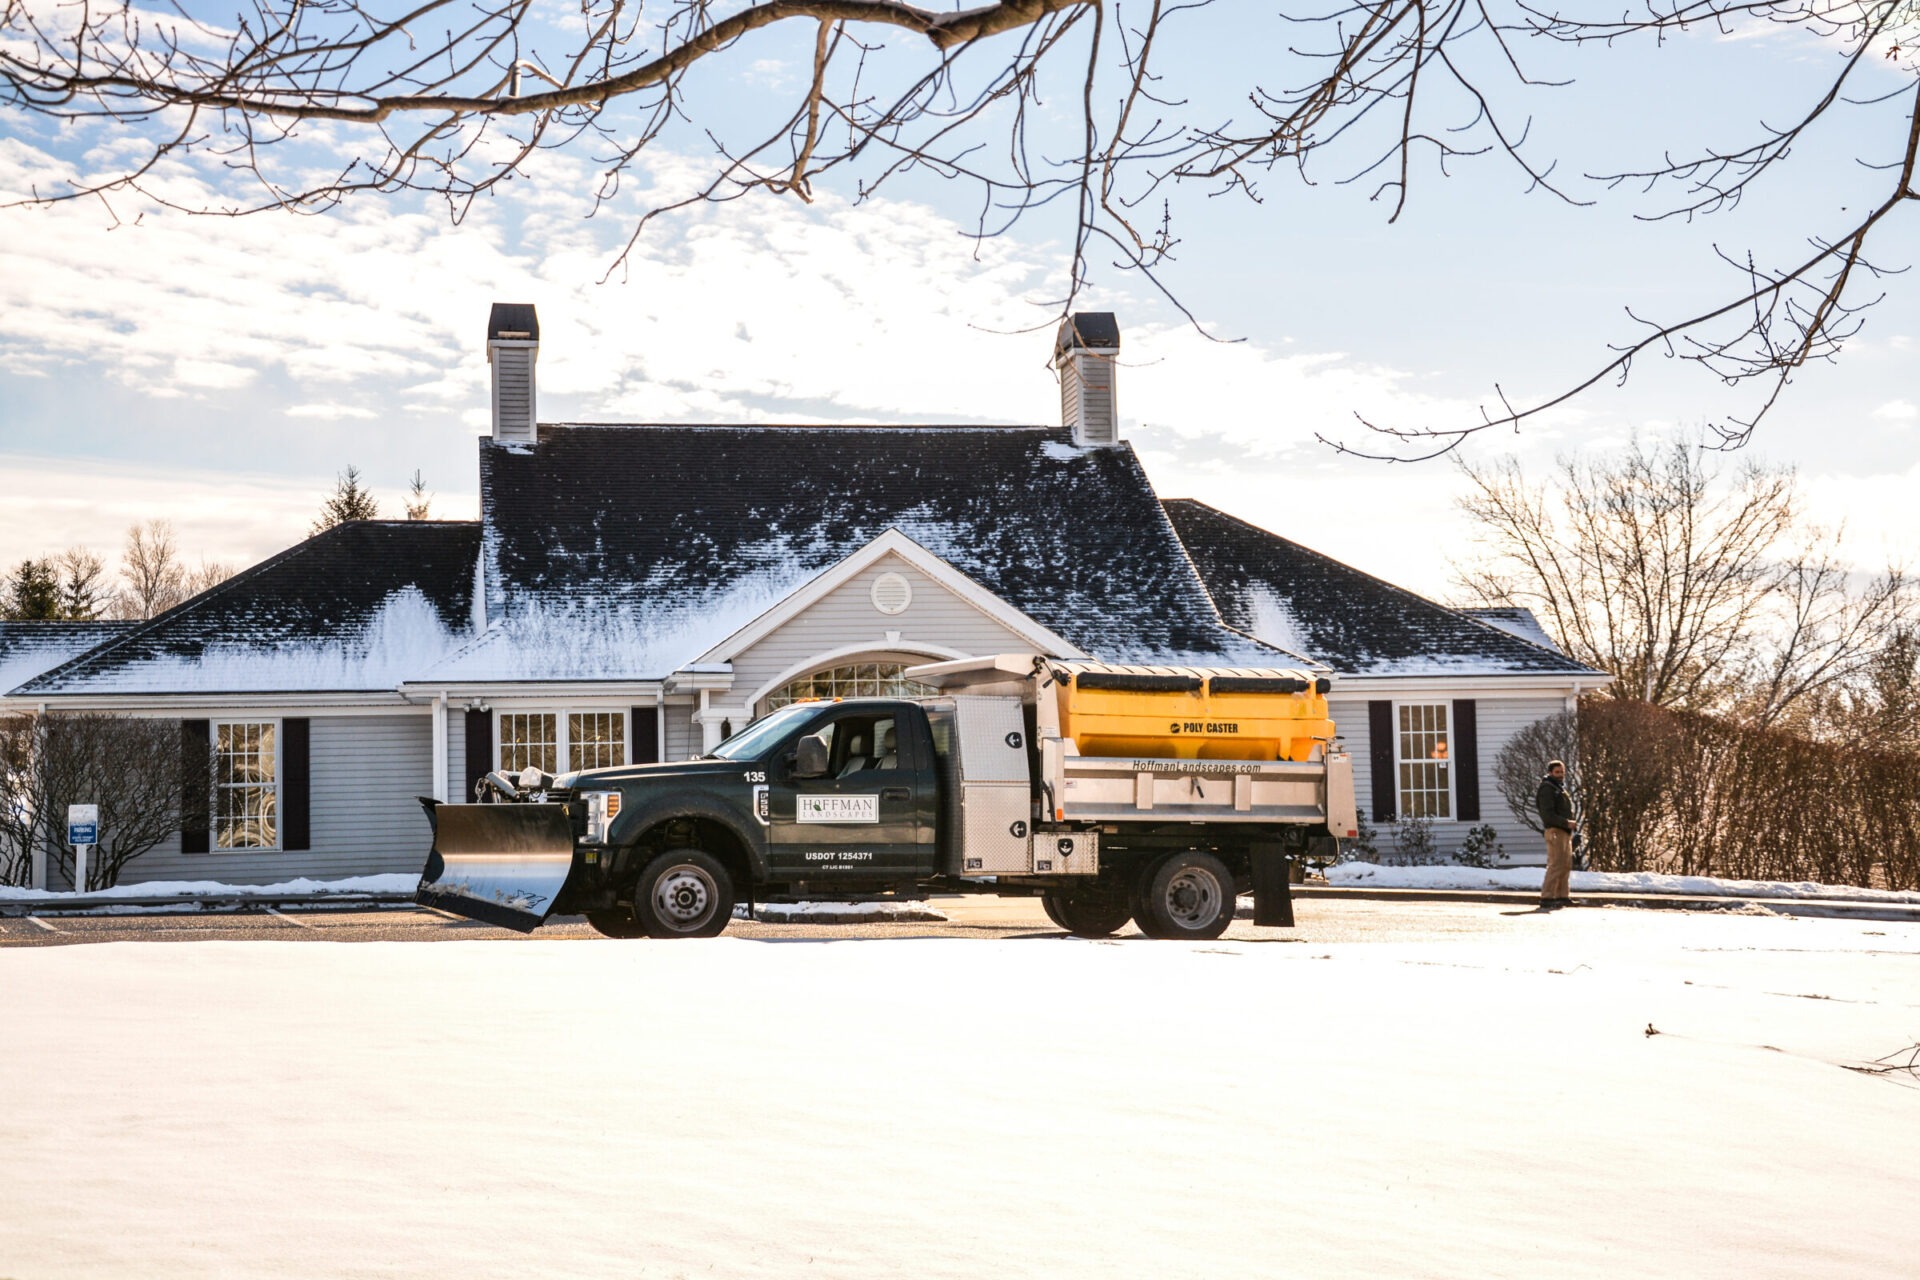 A snow-covered house is visible with a snow plow truck in the driveway. A person stands nearby on a clear, sunny winter day.